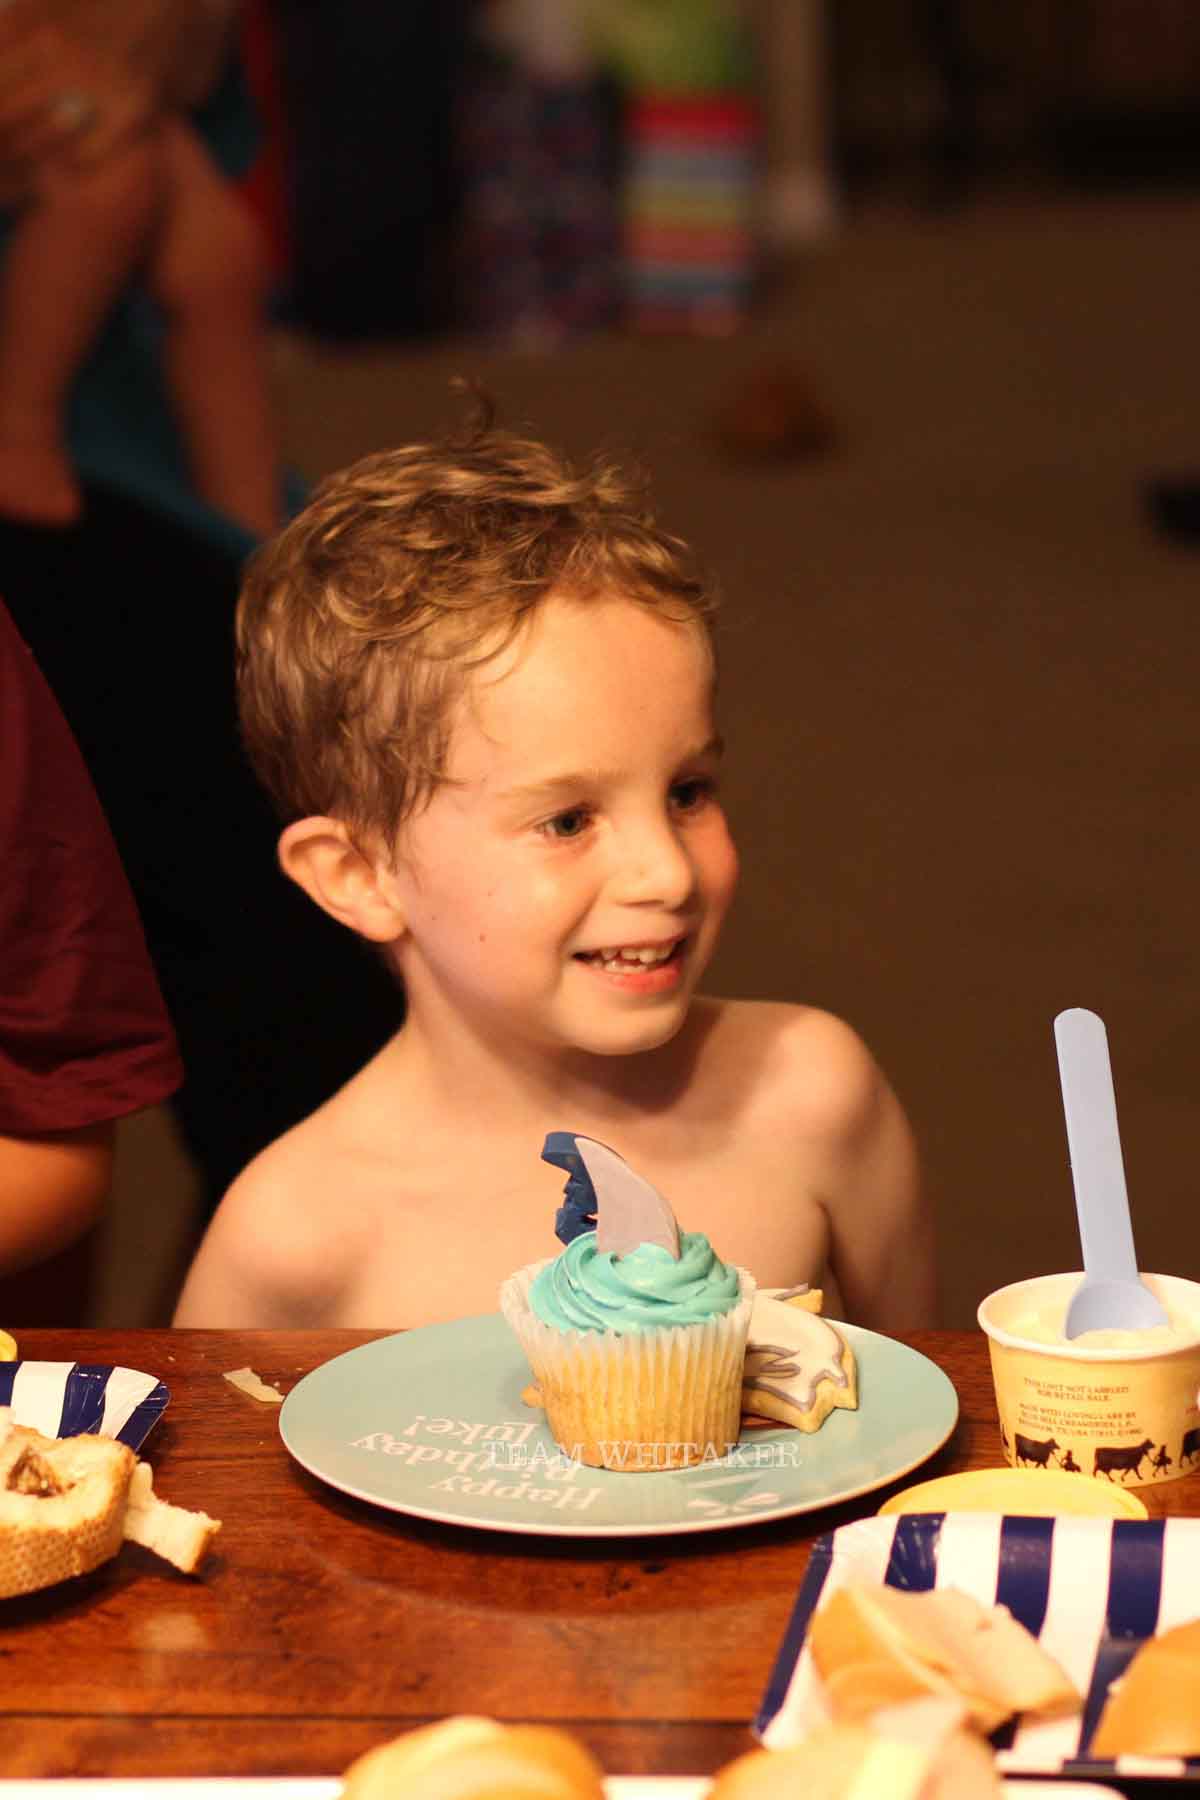 Looking for a fin-tastic birthday theme? This shark birthday party is perfect for the little boy in your life. It's full of creative party favors, shark-themed food and fun water games. Time to get your bite on. Chomp! Chomp!